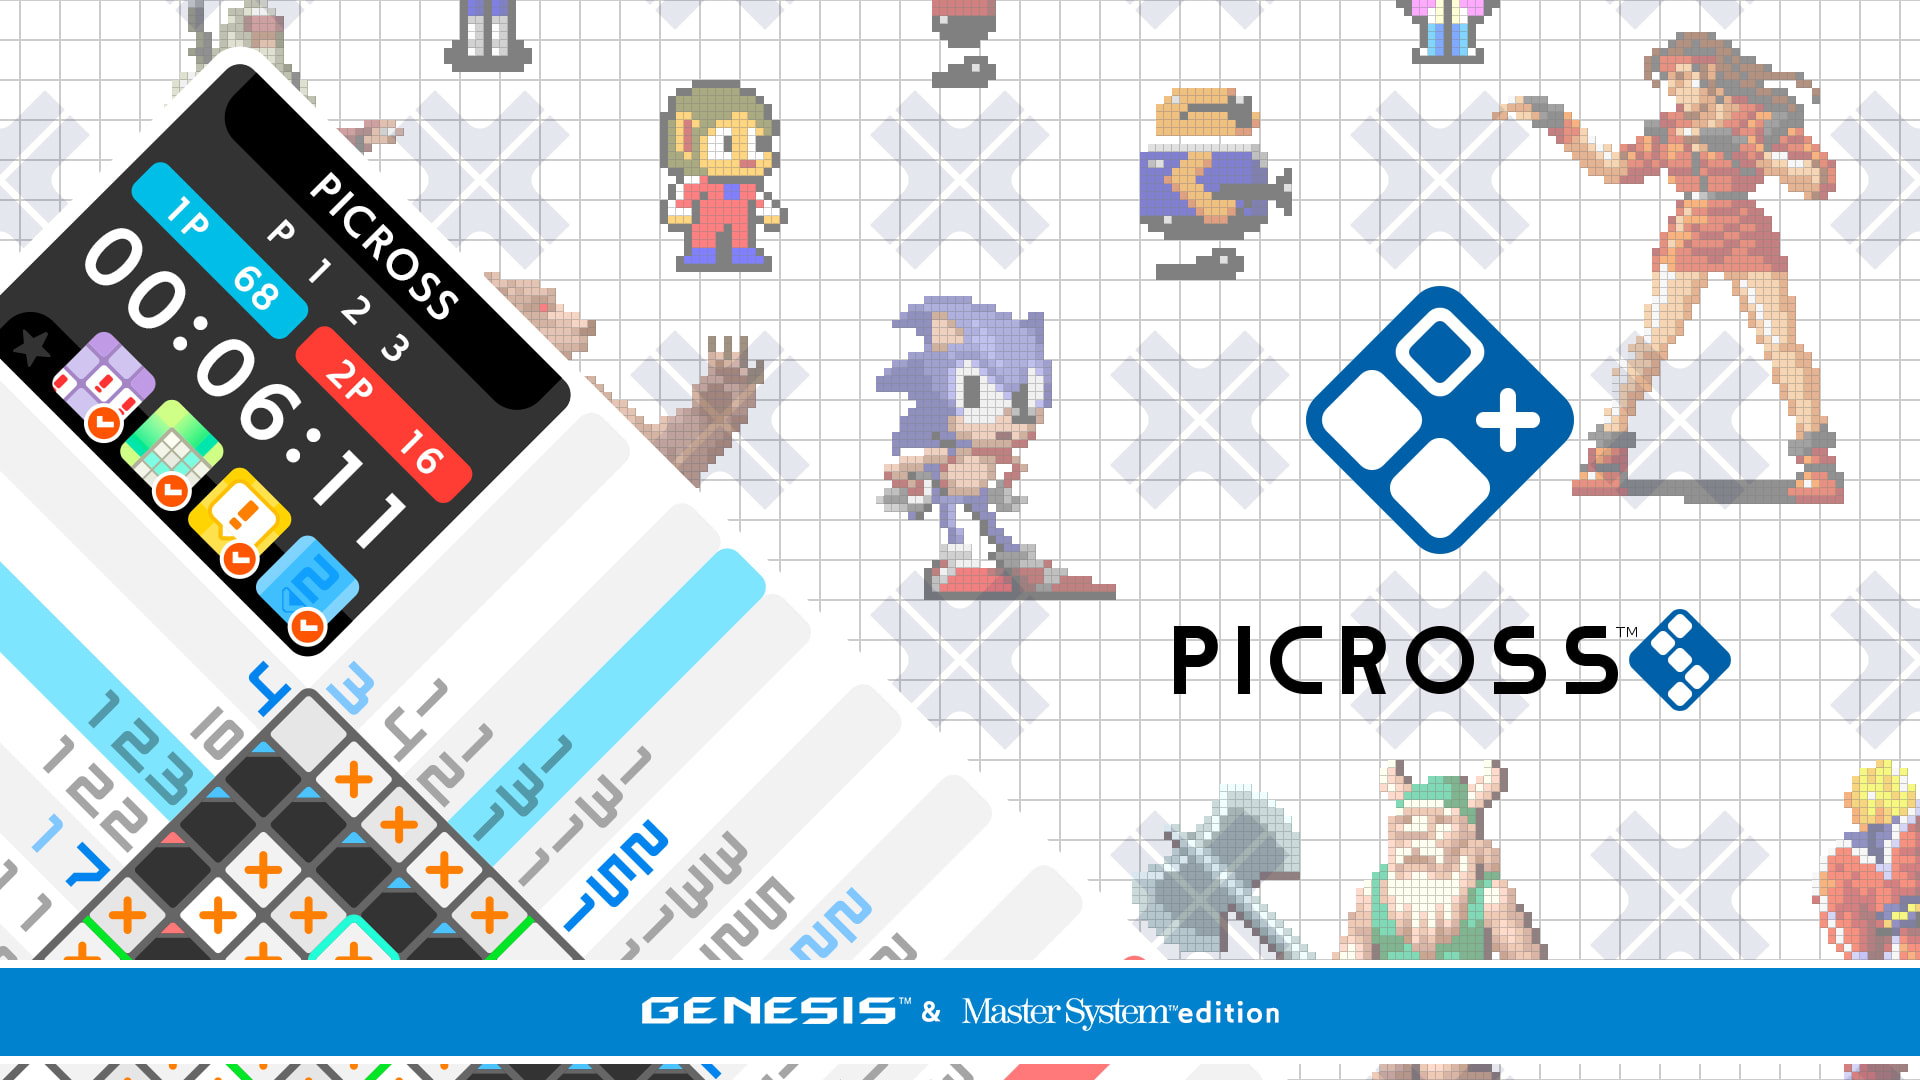 PICROSS S GENESIS & Master System edition